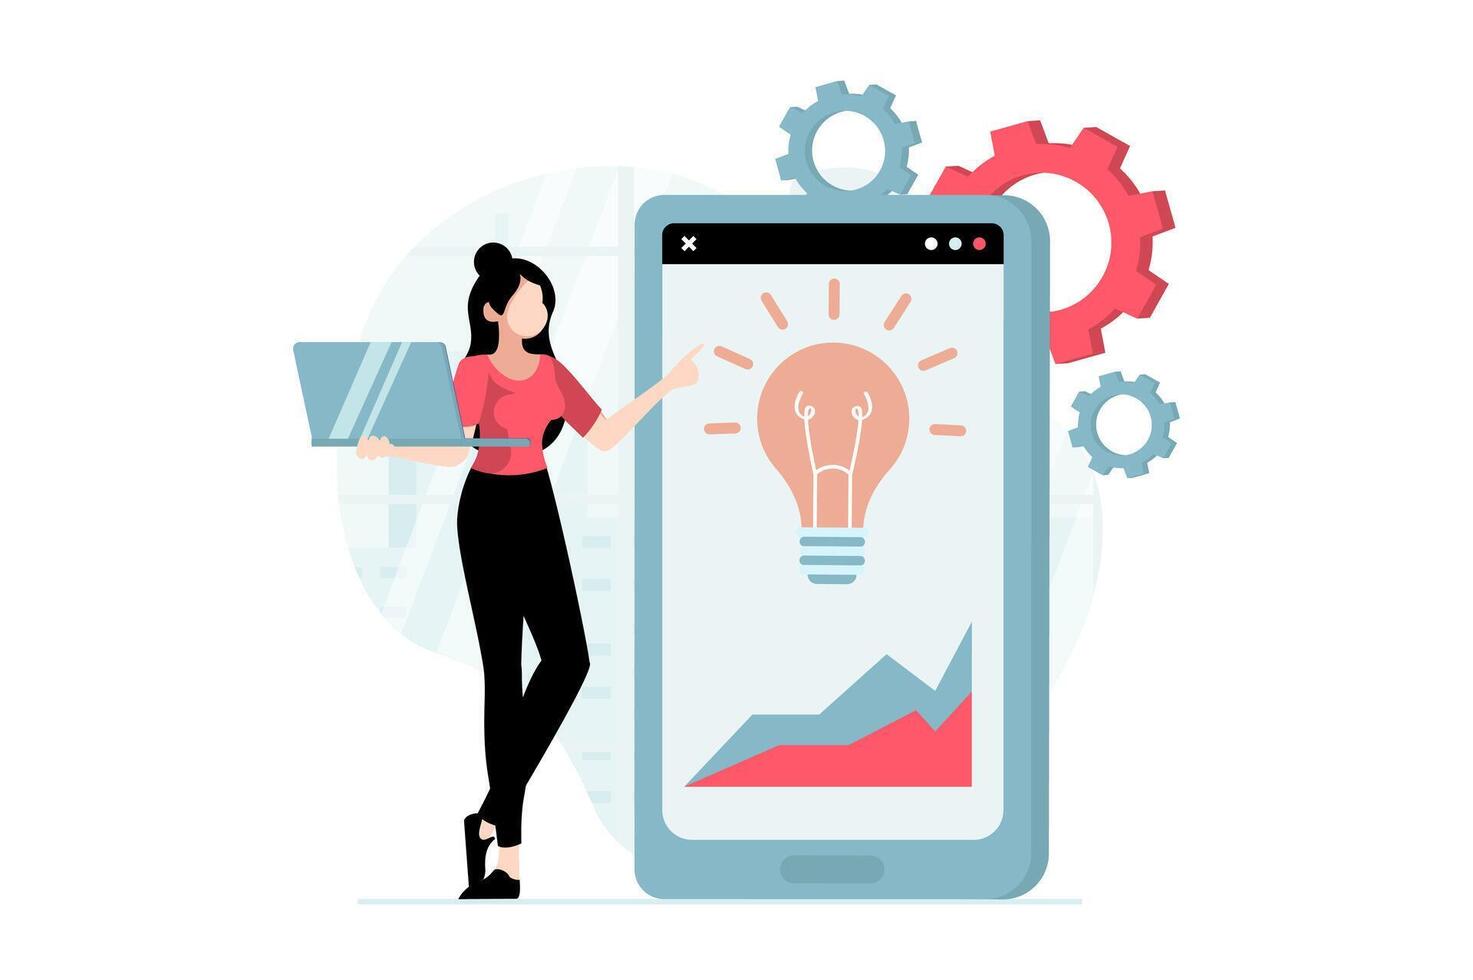 Data science concept with people scene in flat design. Woman working with statistics charts using mobile app, generates new ideas and solutions. illustration with character situation for web vector